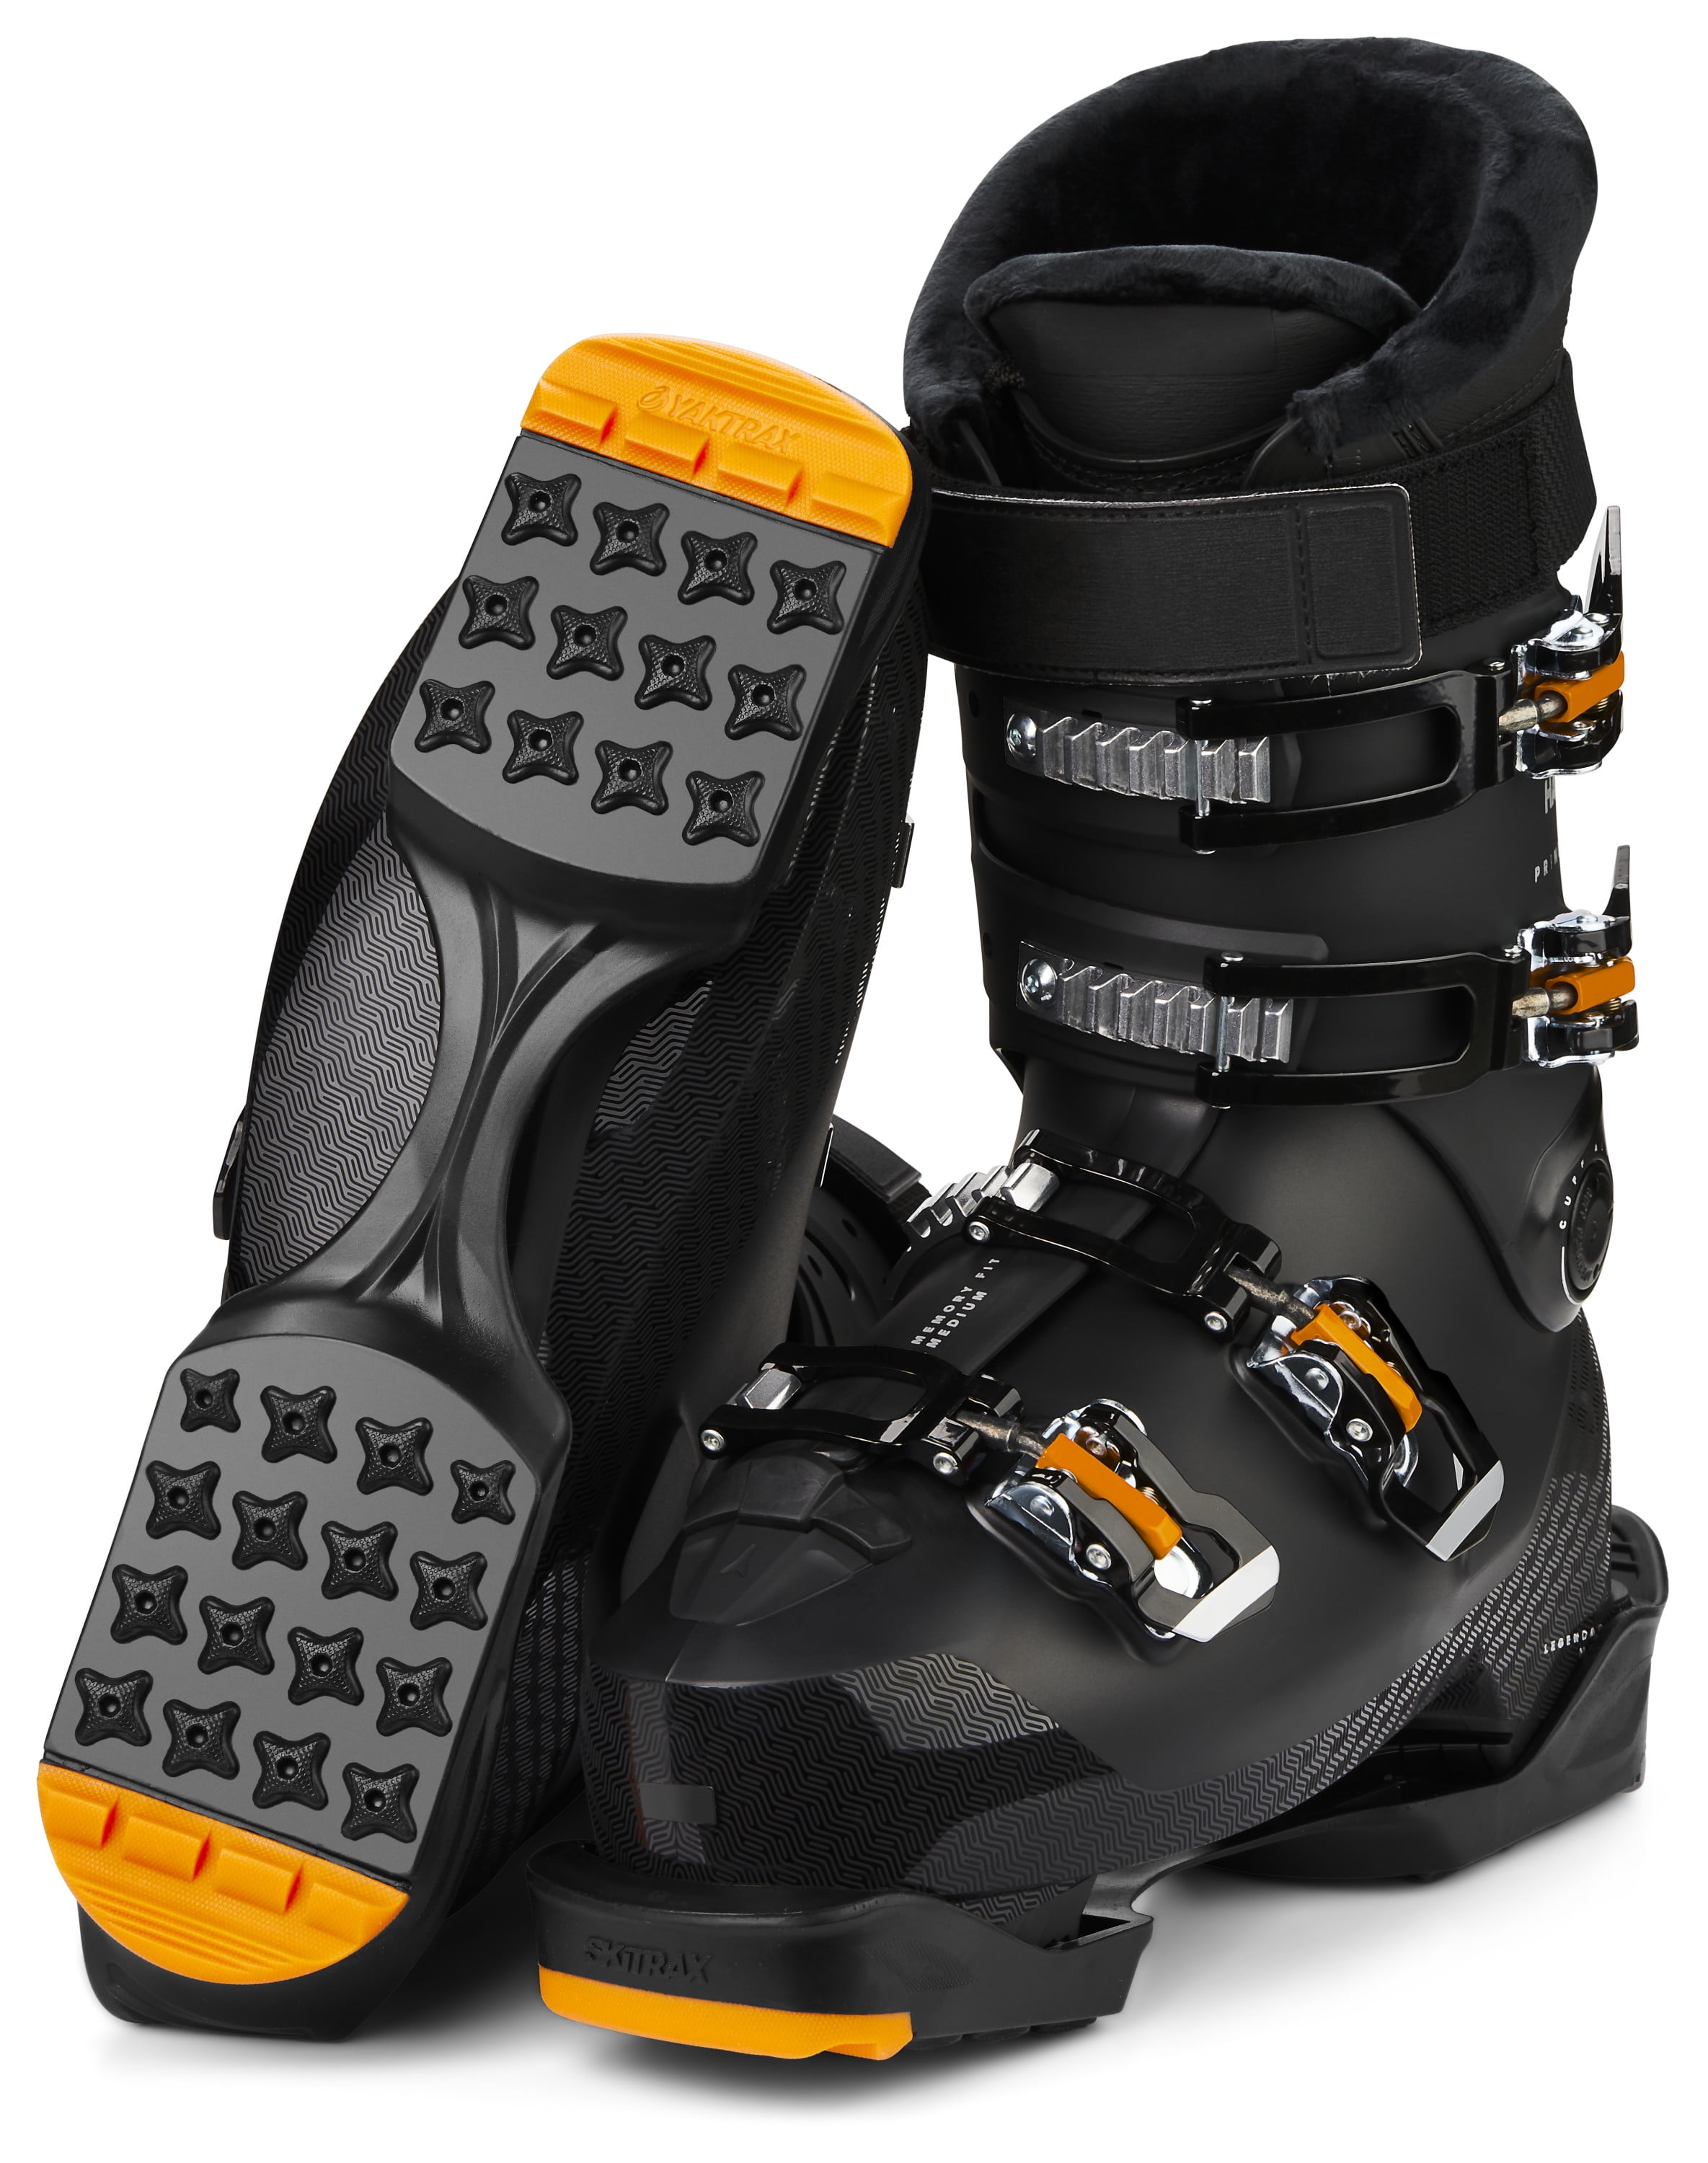 What's better than taking your ski boots off after a long day? Getting to  slip into the comfort that is the Dynafit Winter Bootie!!! Size